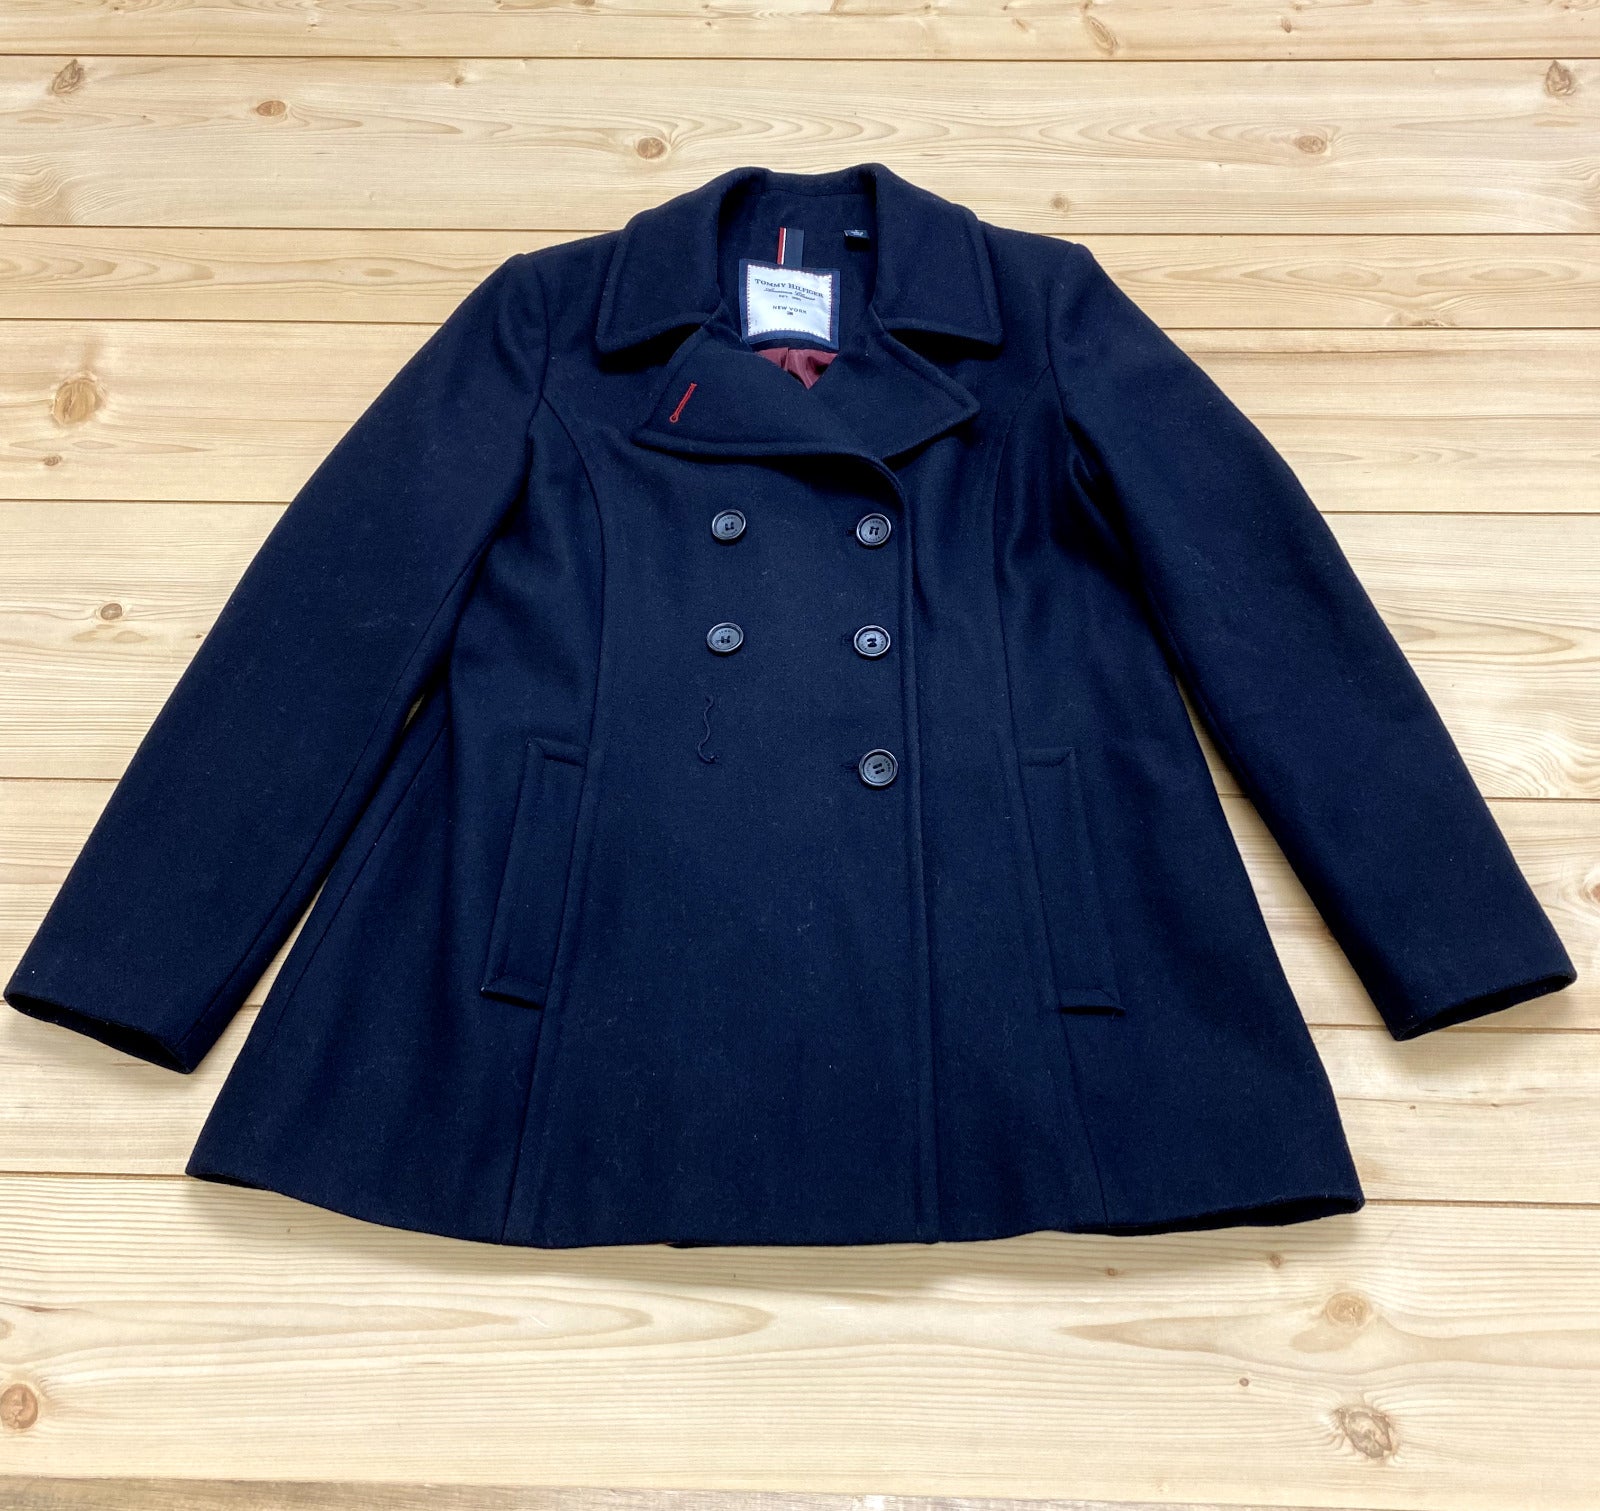 Tommy Hilfiger Black Classic Double-Breasted Wool Blend Peacoat Women Size L